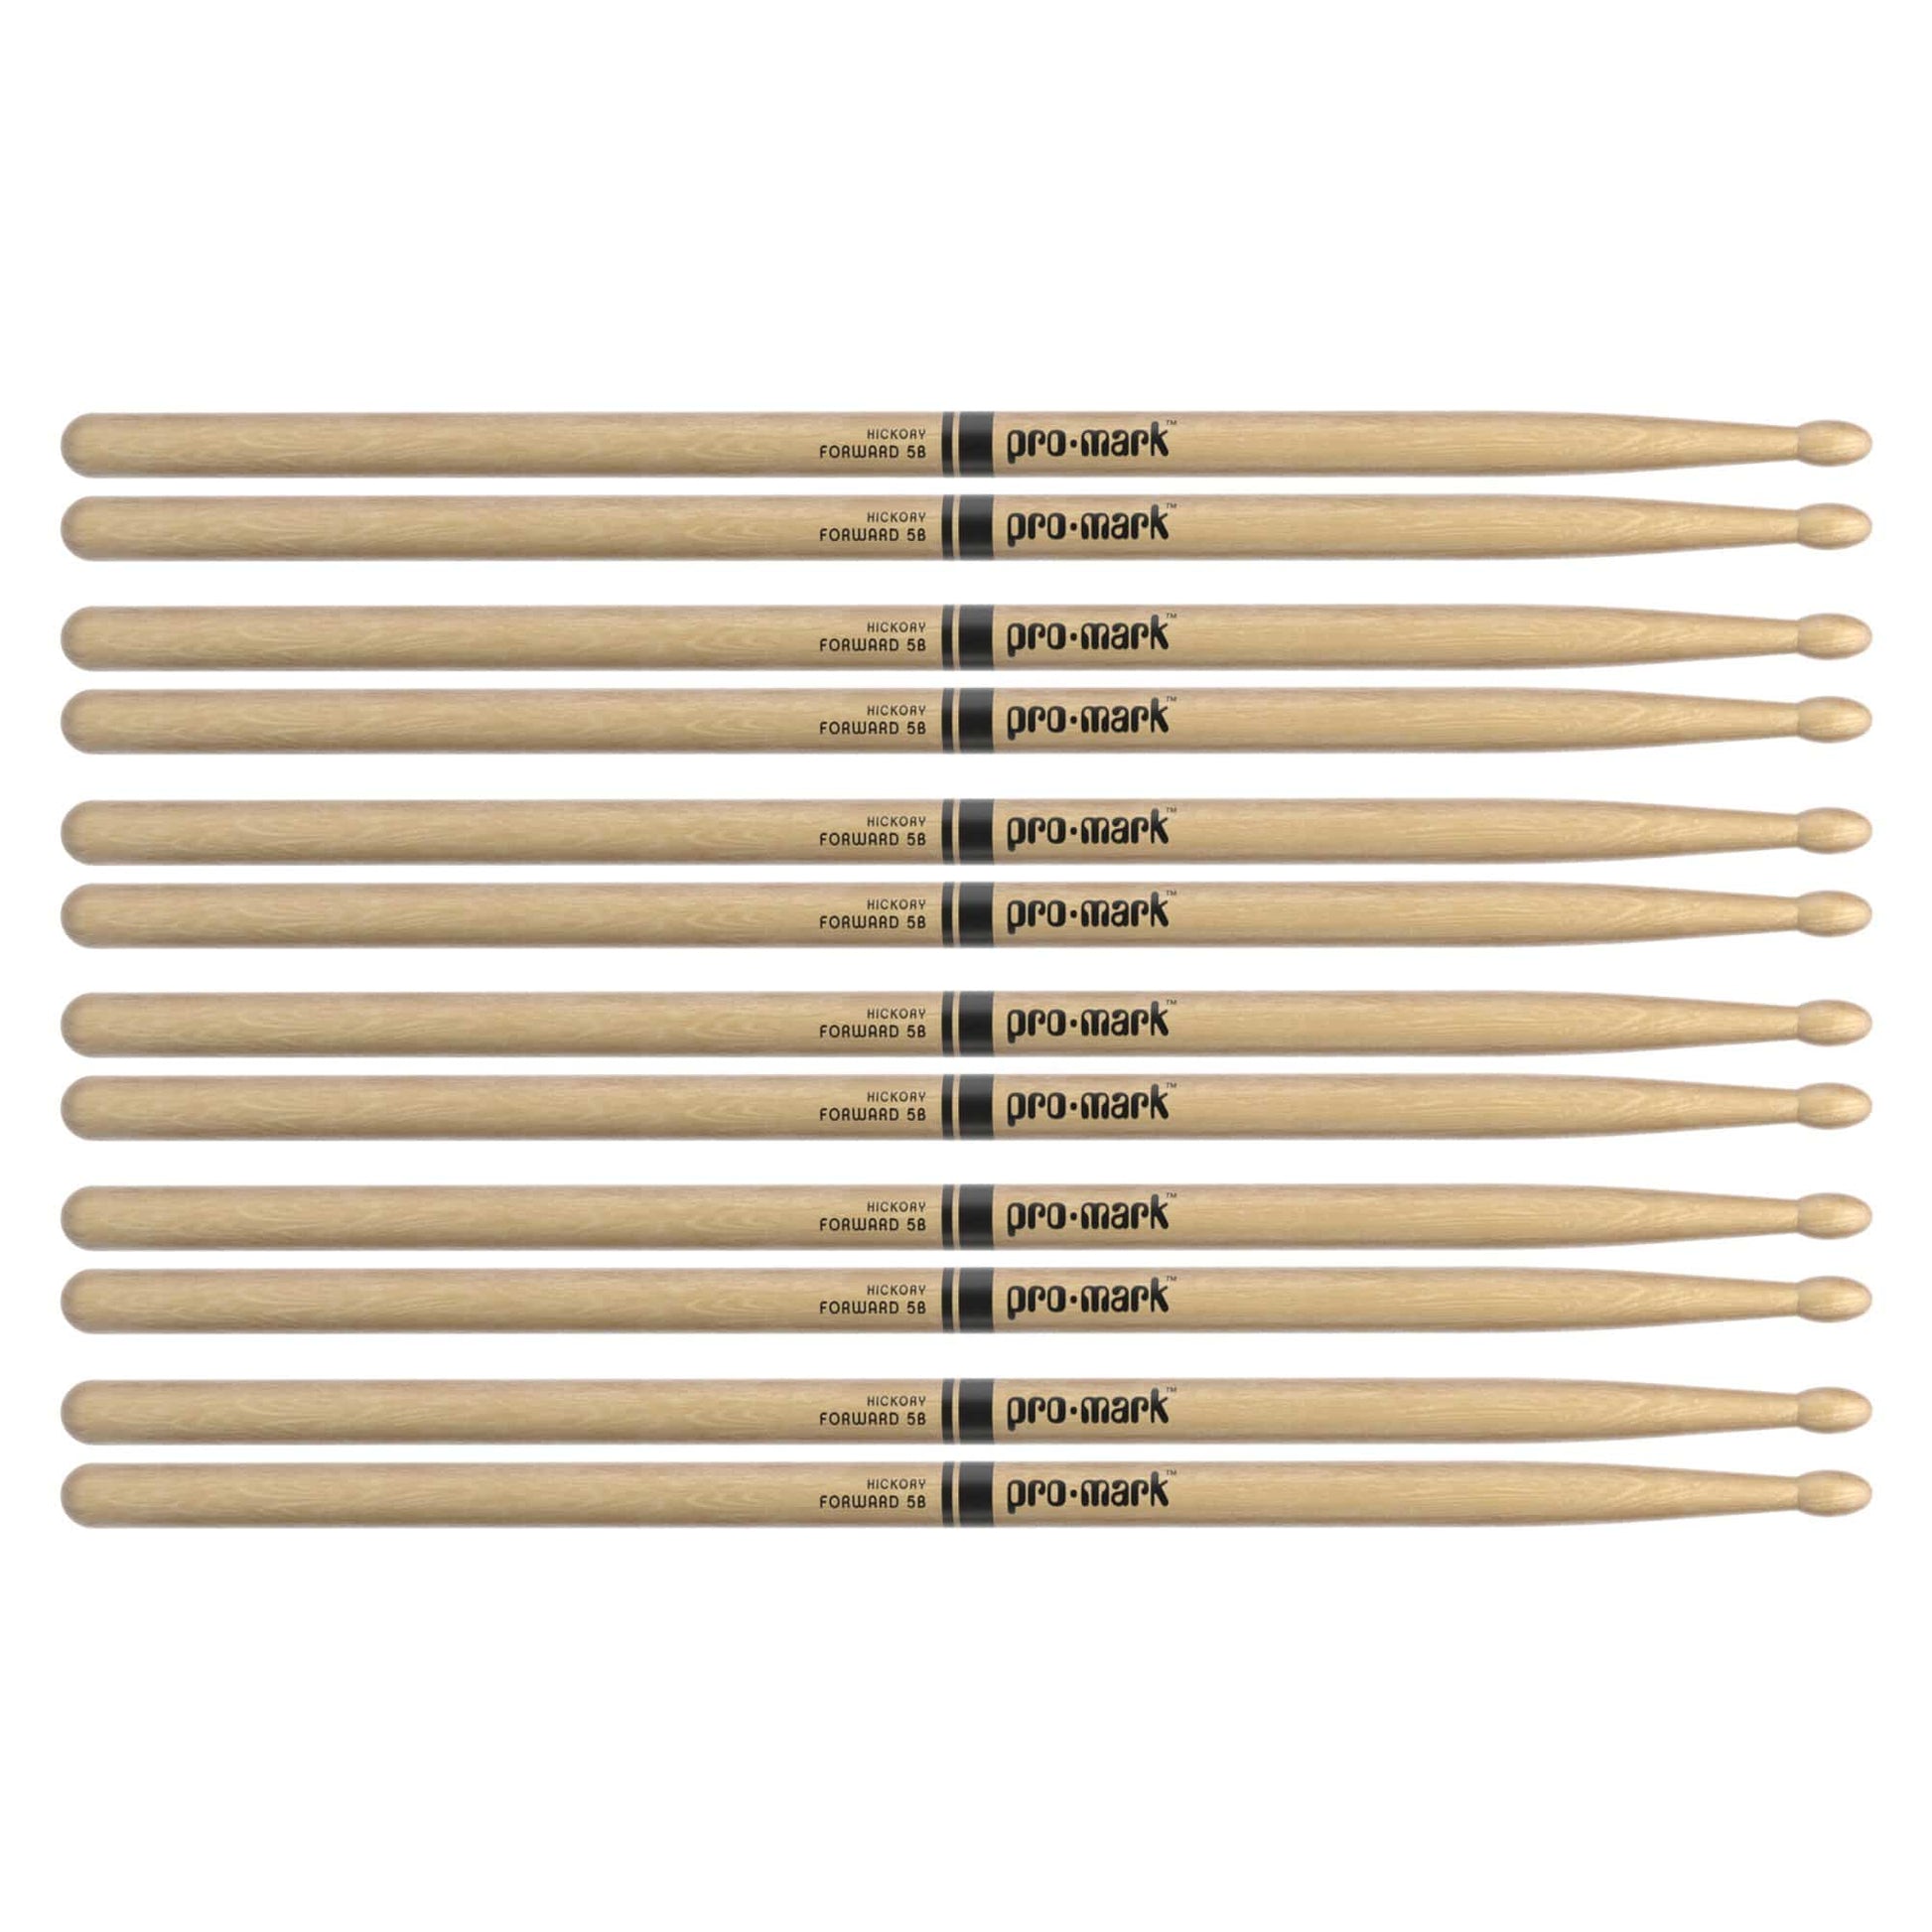 Promark American Hickory 5B Wood Tip Drum Sticks (6 Pair Bundle) Drums and Percussion / Parts and Accessories / Drum Sticks and Mallets